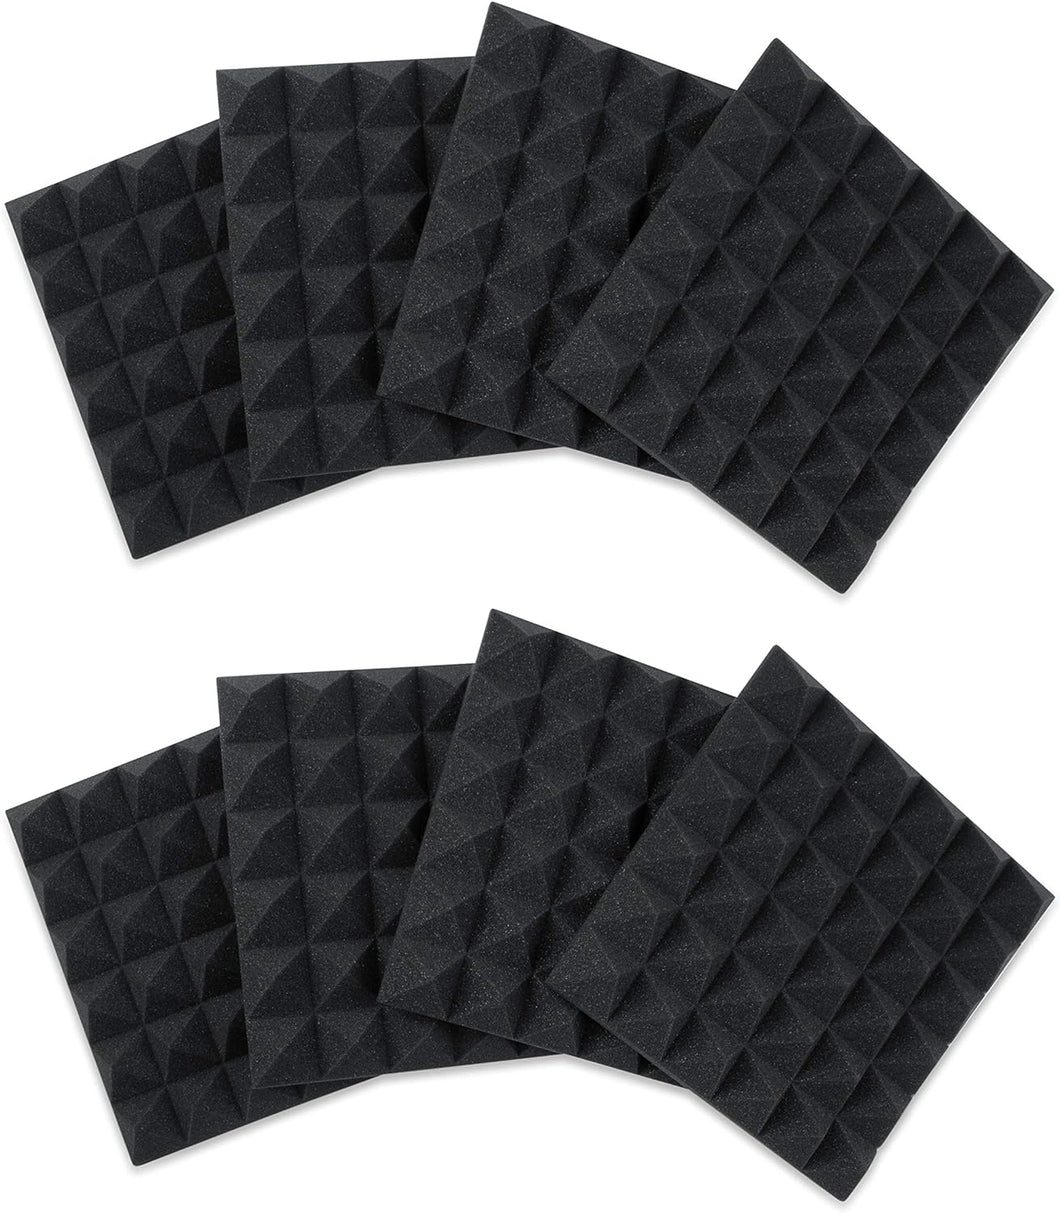 Gator Frameworks 2” Thick Acoustic Foam Pyramid Panels 12”x12”; Charcoal (8) Pack